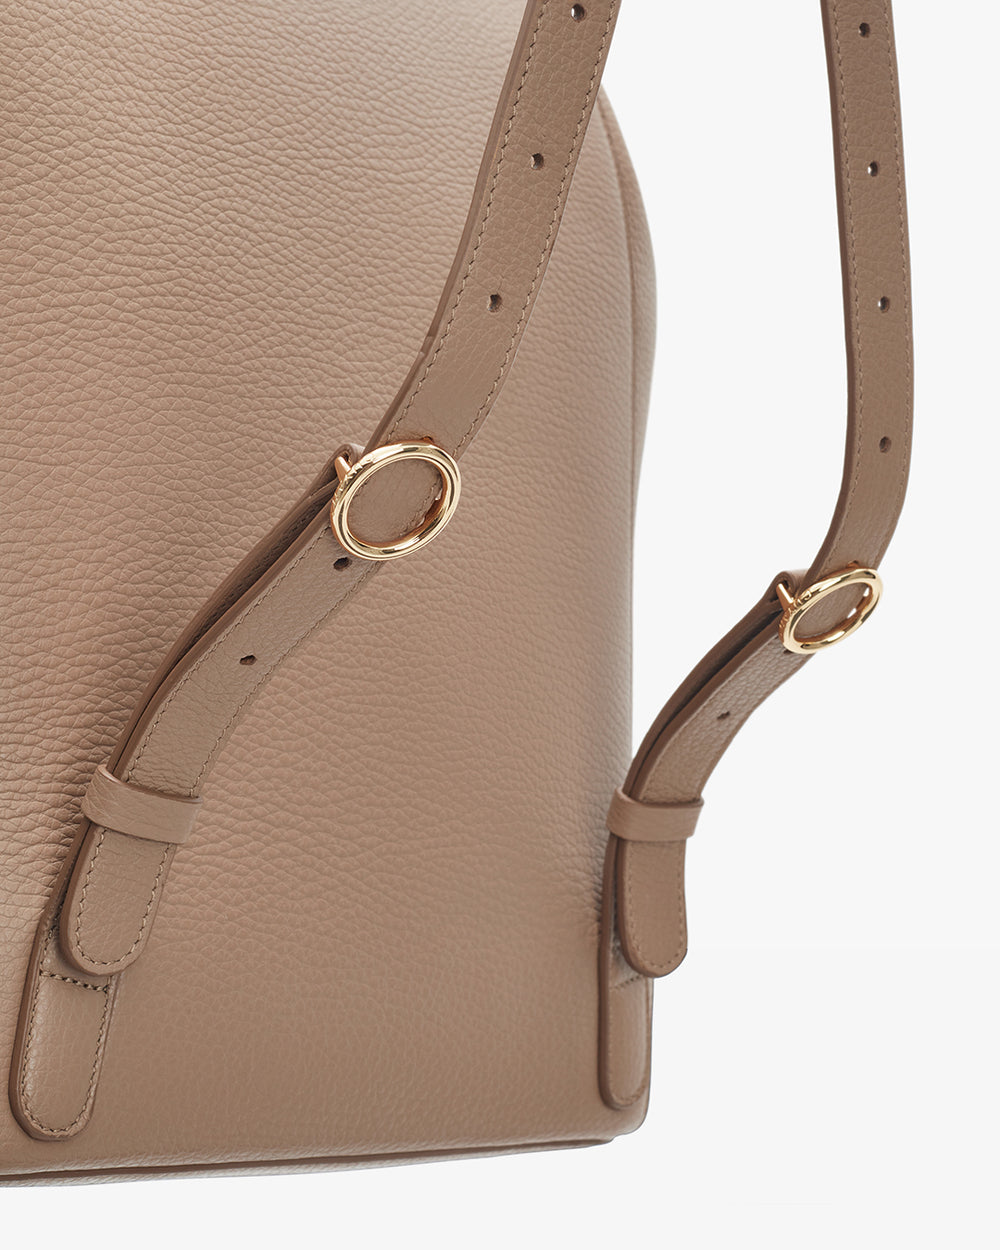 Close-up of a bag with adjustable straps and metal buckles.